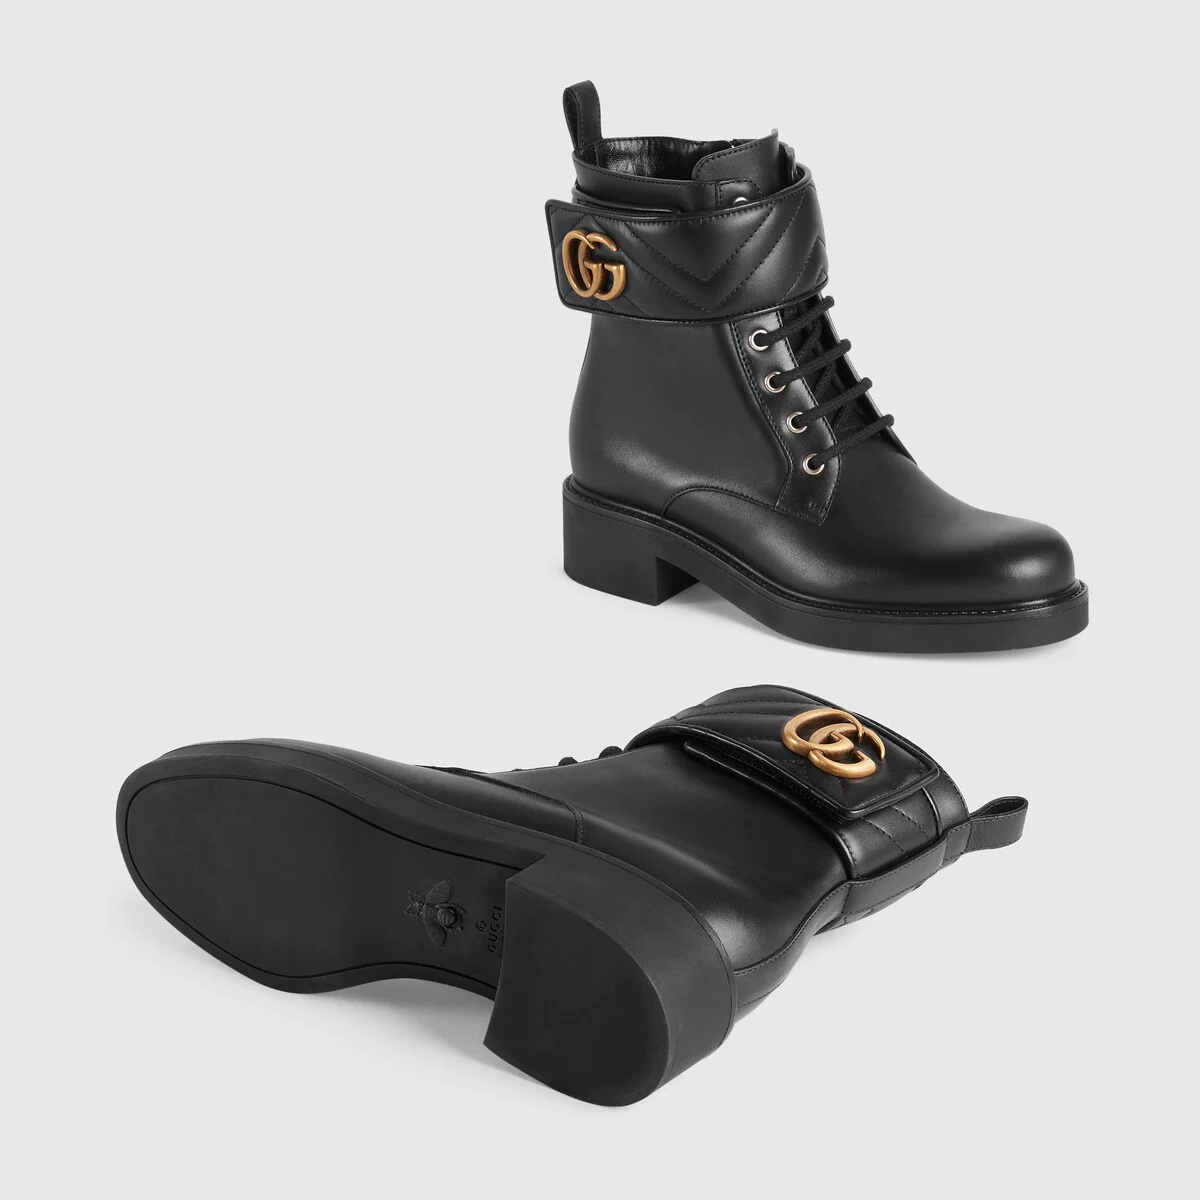 Women's ankle boot with Double G - 5